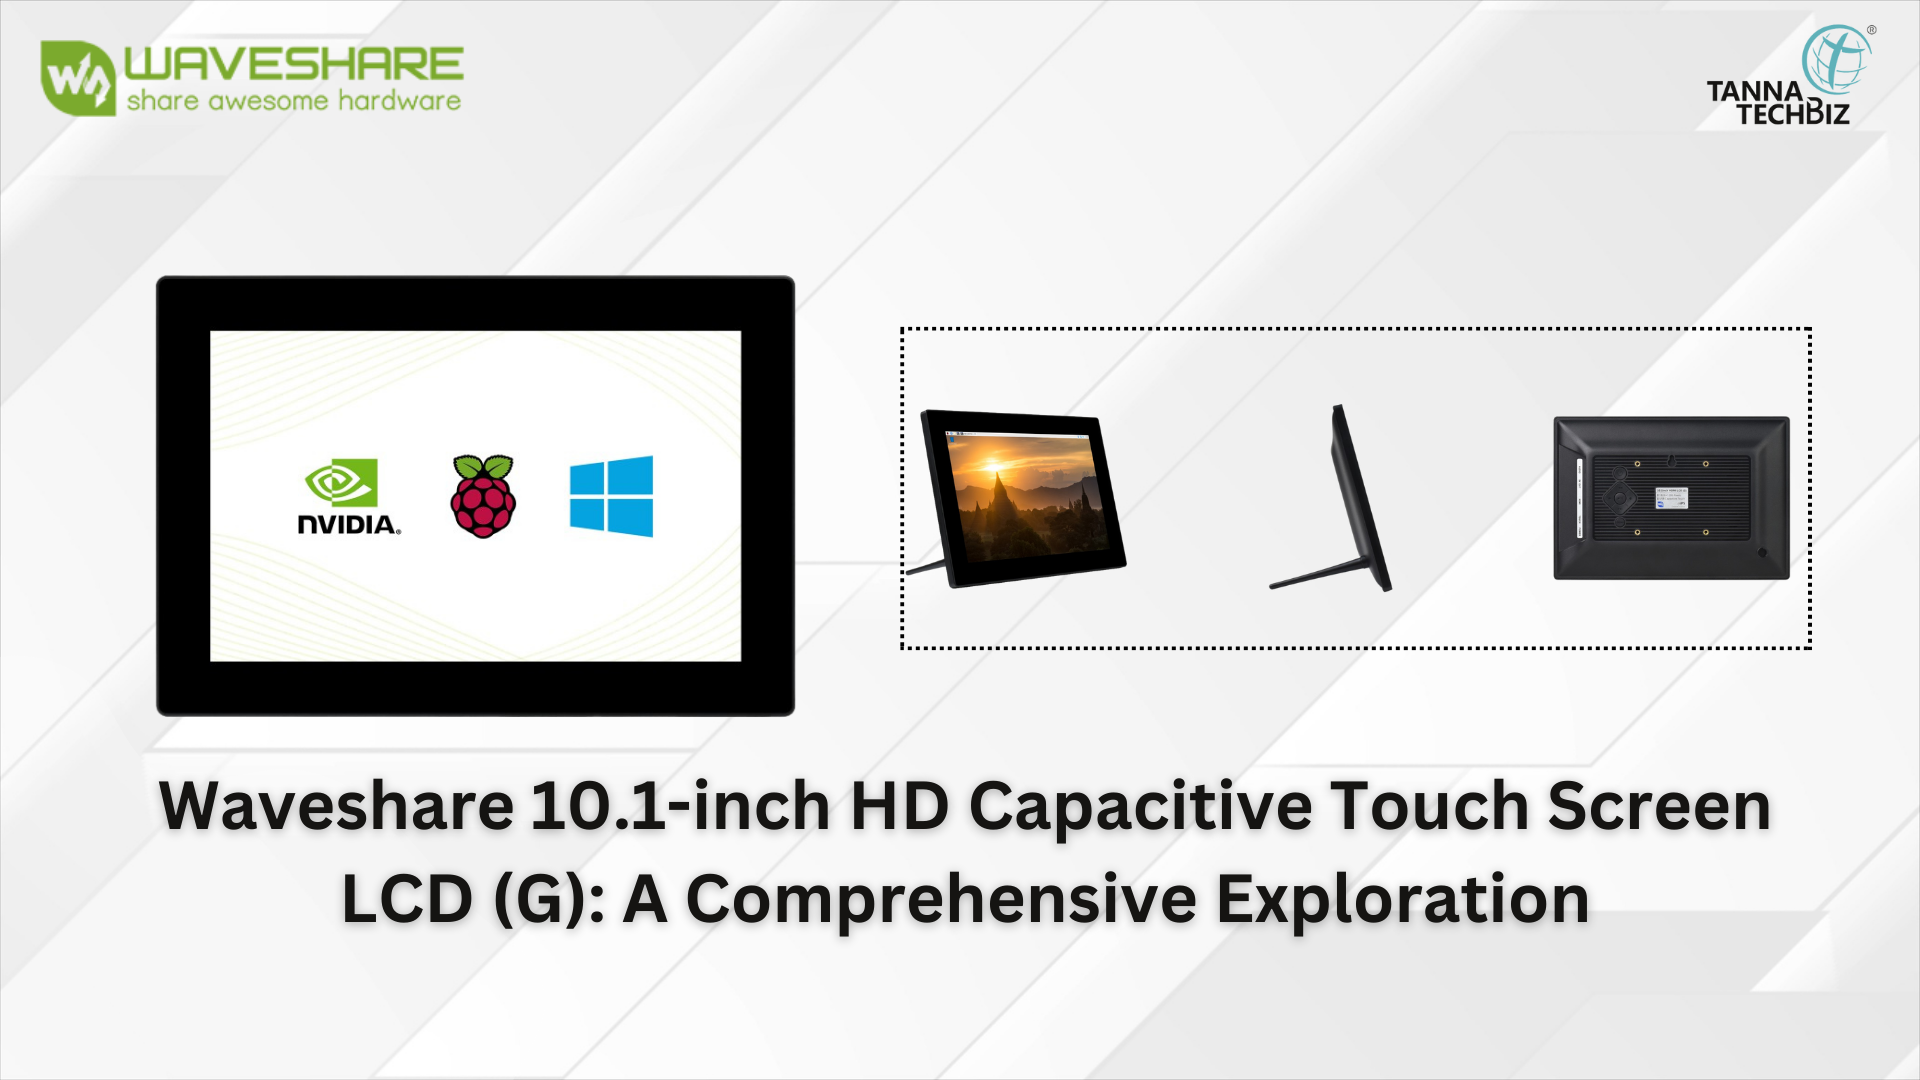 Waveshare 10.1-inch HD Capacitive Touch Screen LCD (G): A Comprehensive Exploration